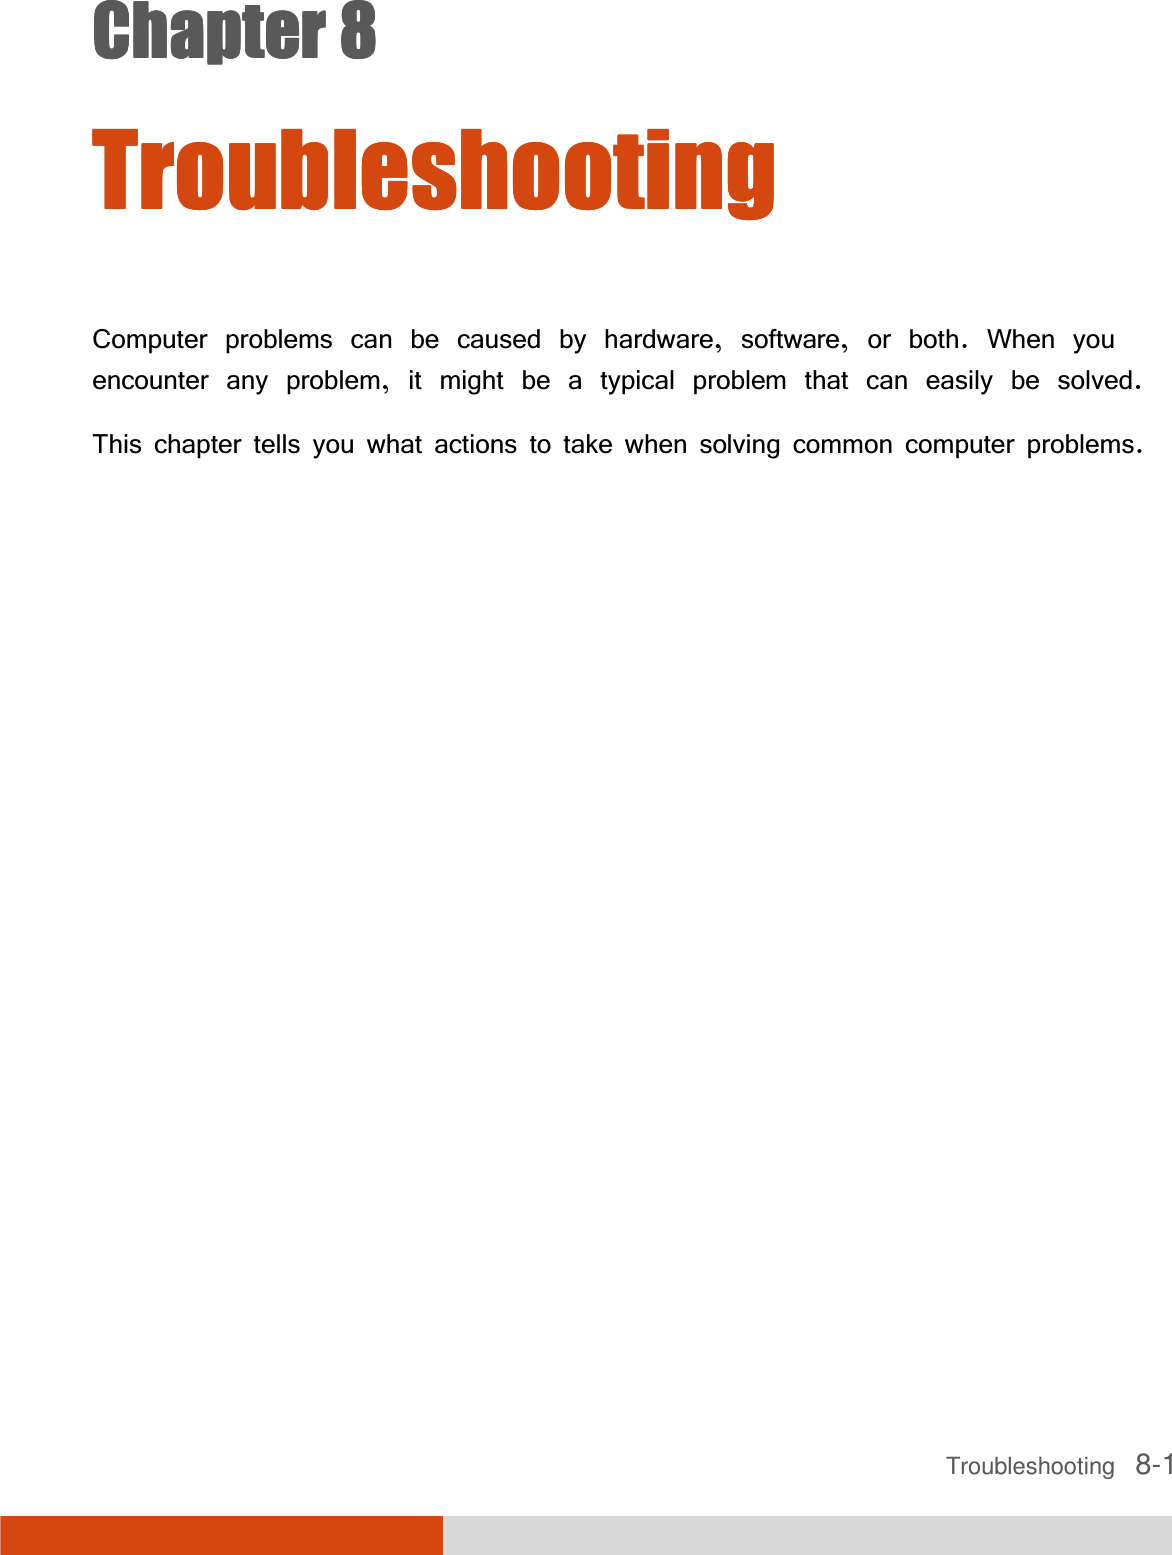 Troubleshooting   8-1Chapter 8Chapter 8Chapter 8Chapter 8     TroubleshootingTroubleshootingTroubleshootingTroubleshooting    Computer problems can be caused by hardware, software, or both. When you encounter any problem, it might be a typical problem that can easily be solved. This chapter tells you what actions to take when solving common computer problems. 